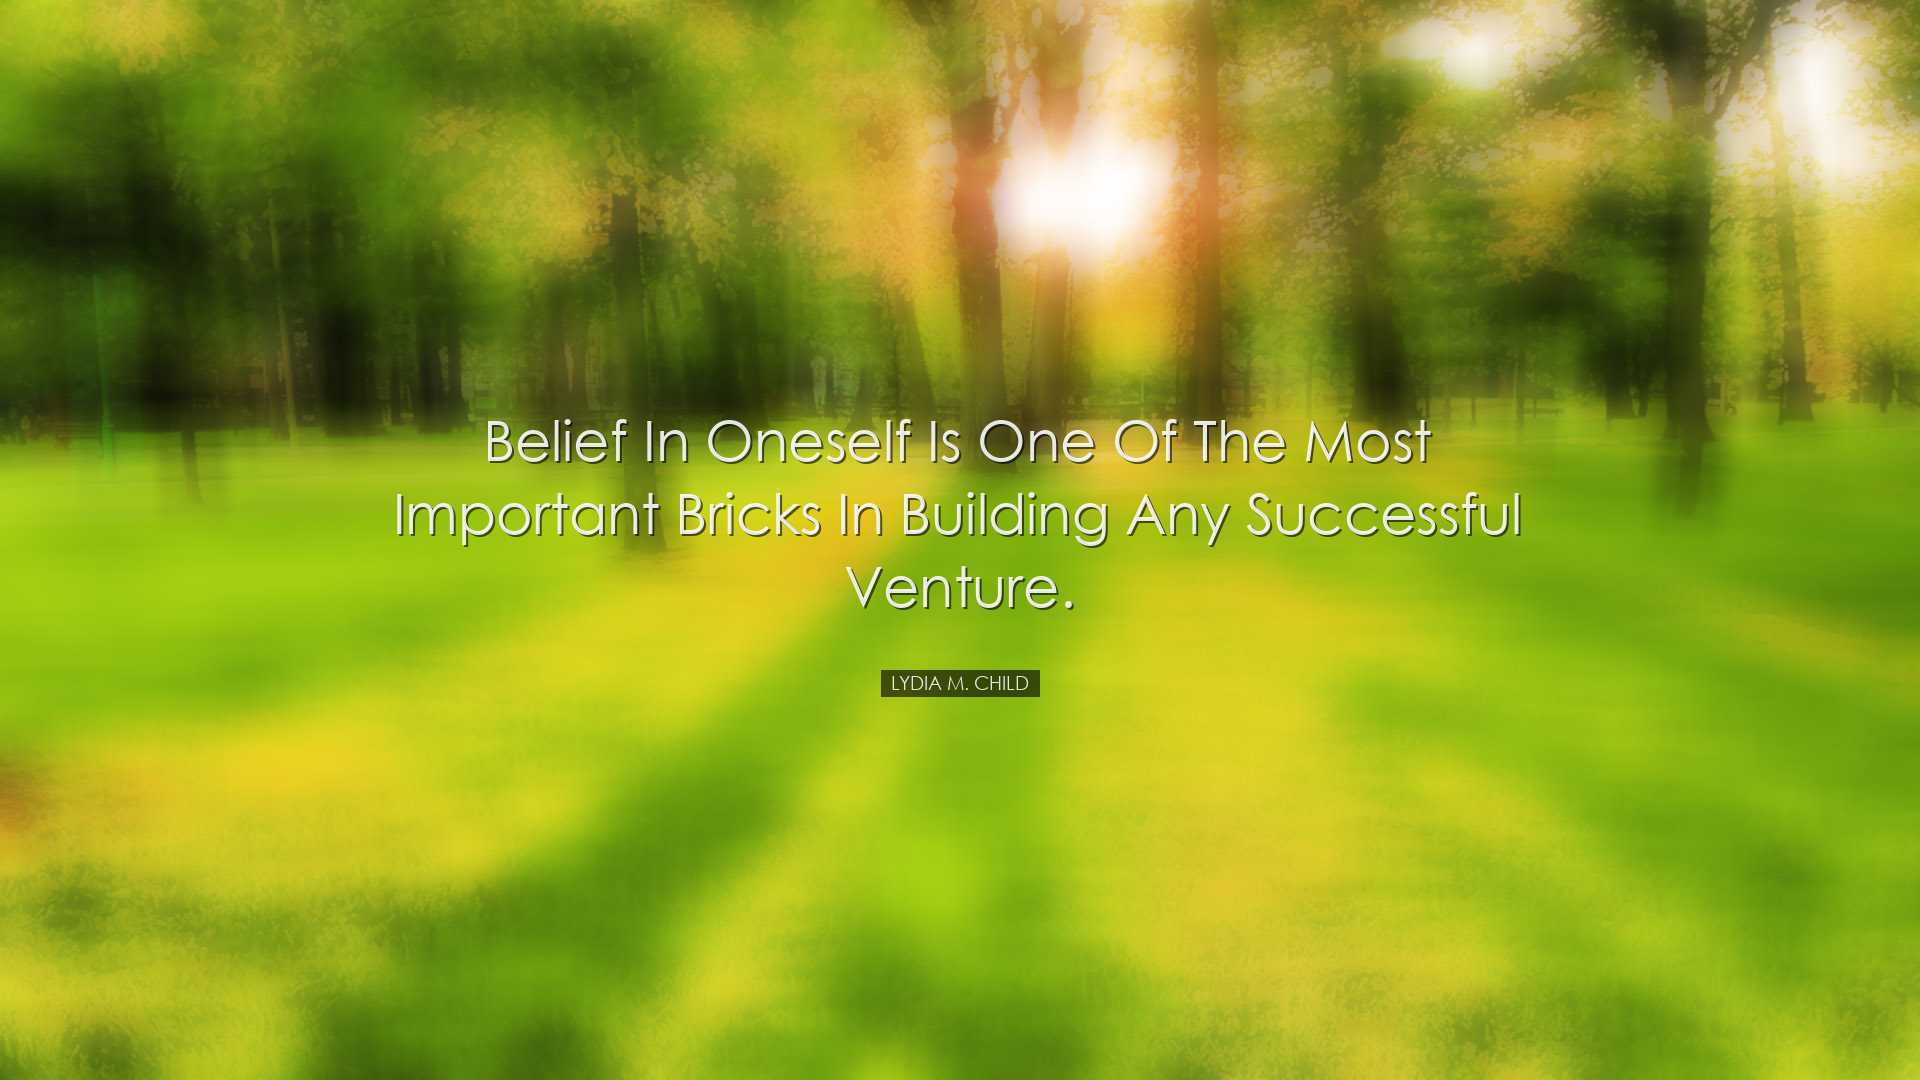 Belief in oneself is one of the most important bricks in building